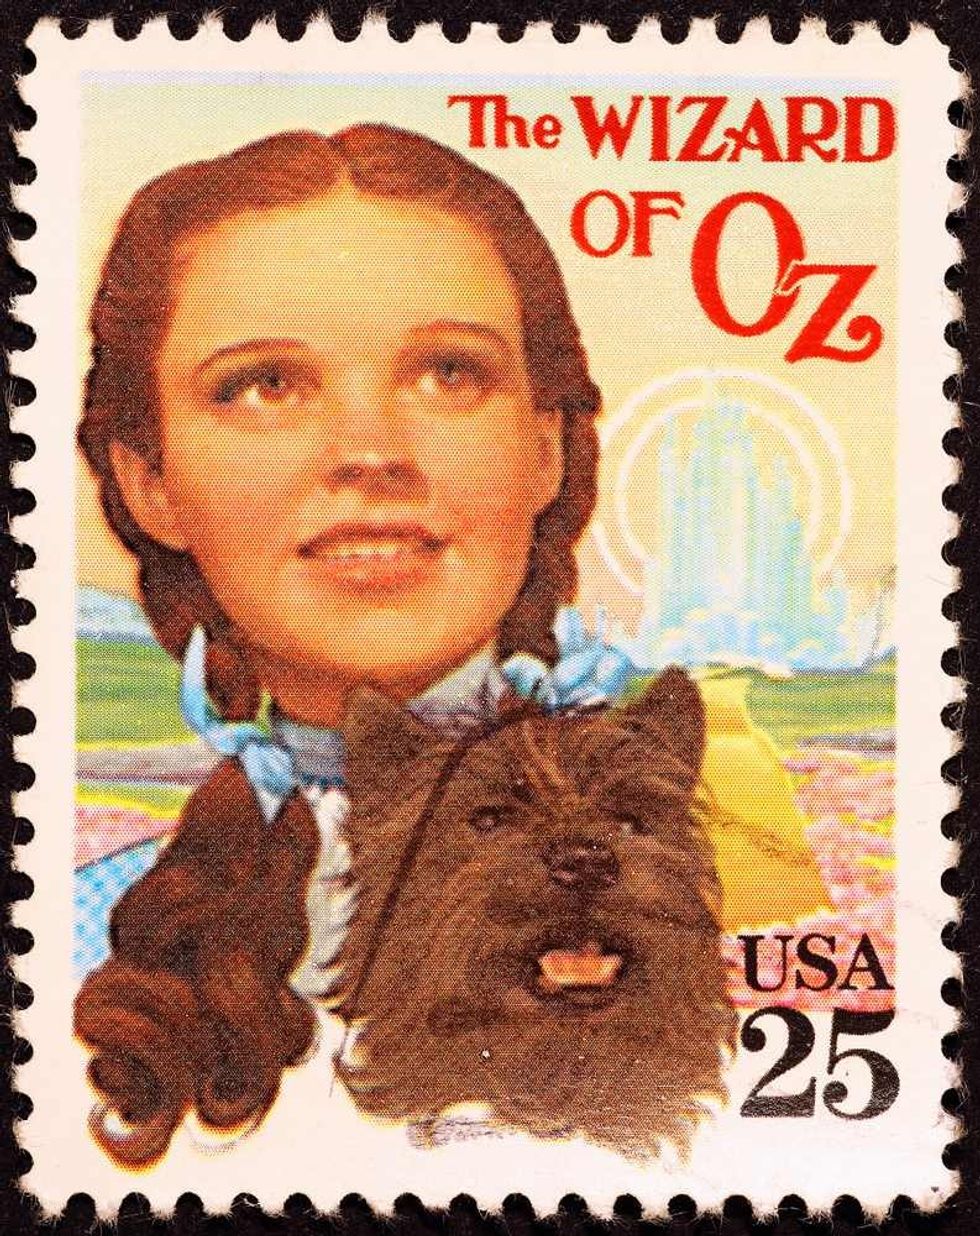  Movie Wizard of Oz poster